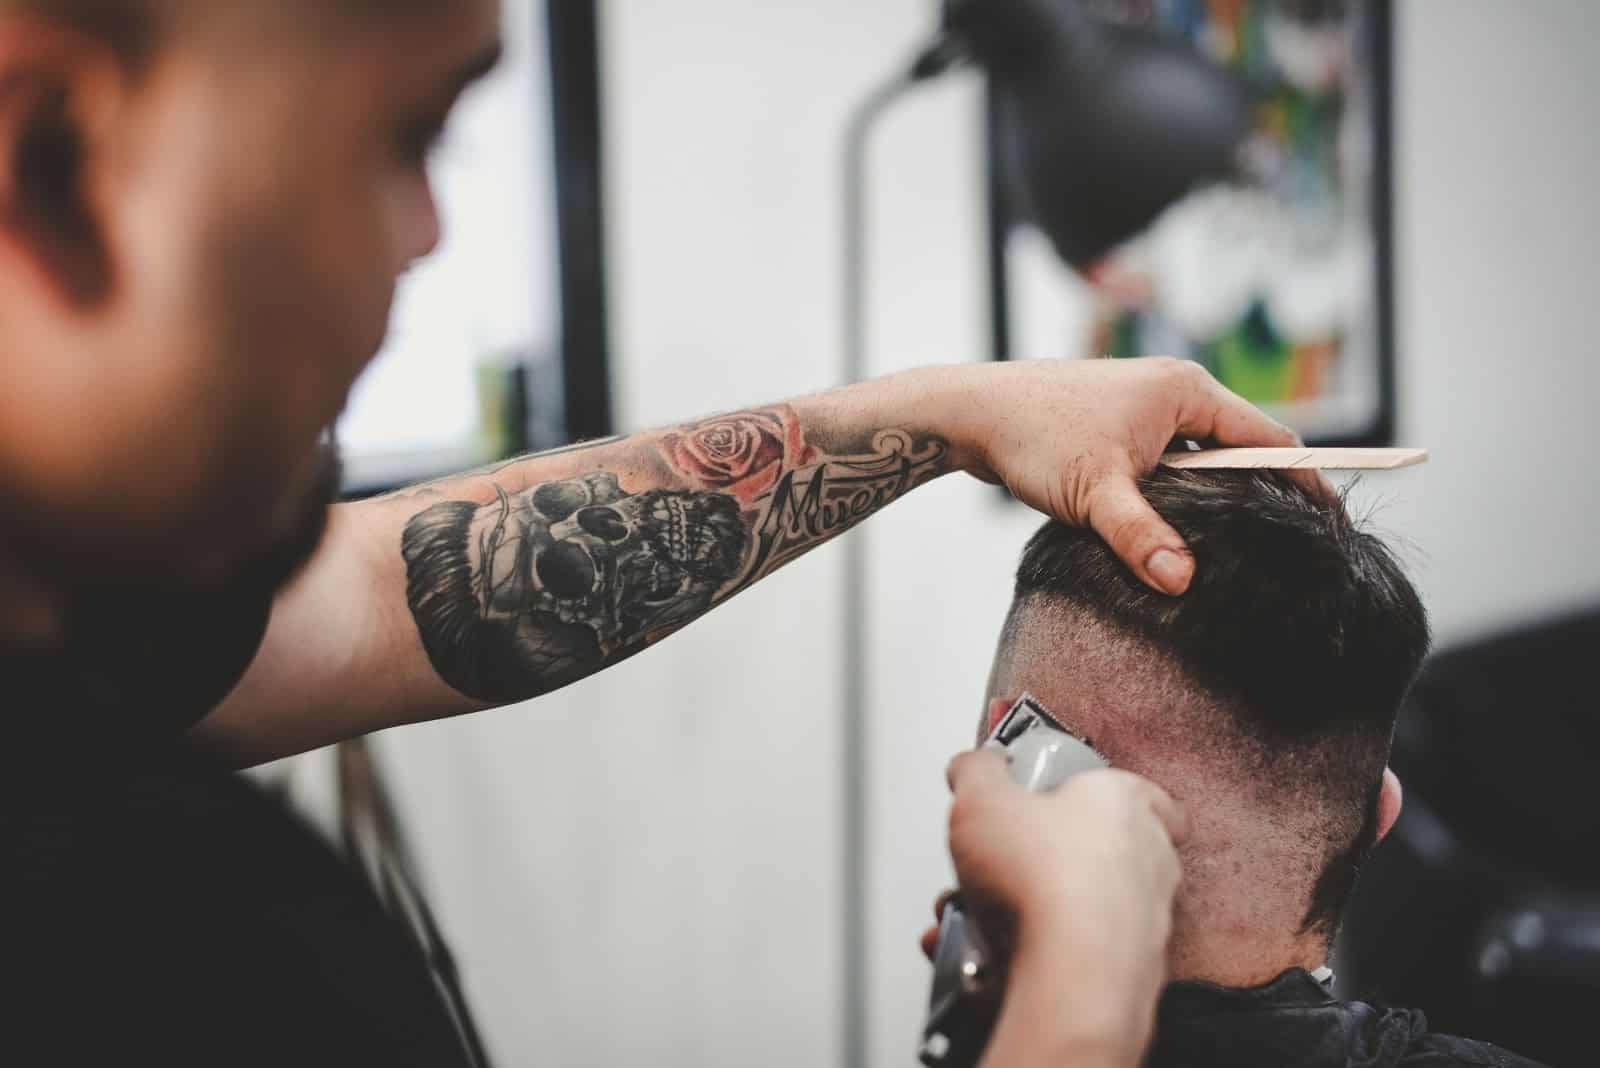 A barber shaves a man's head